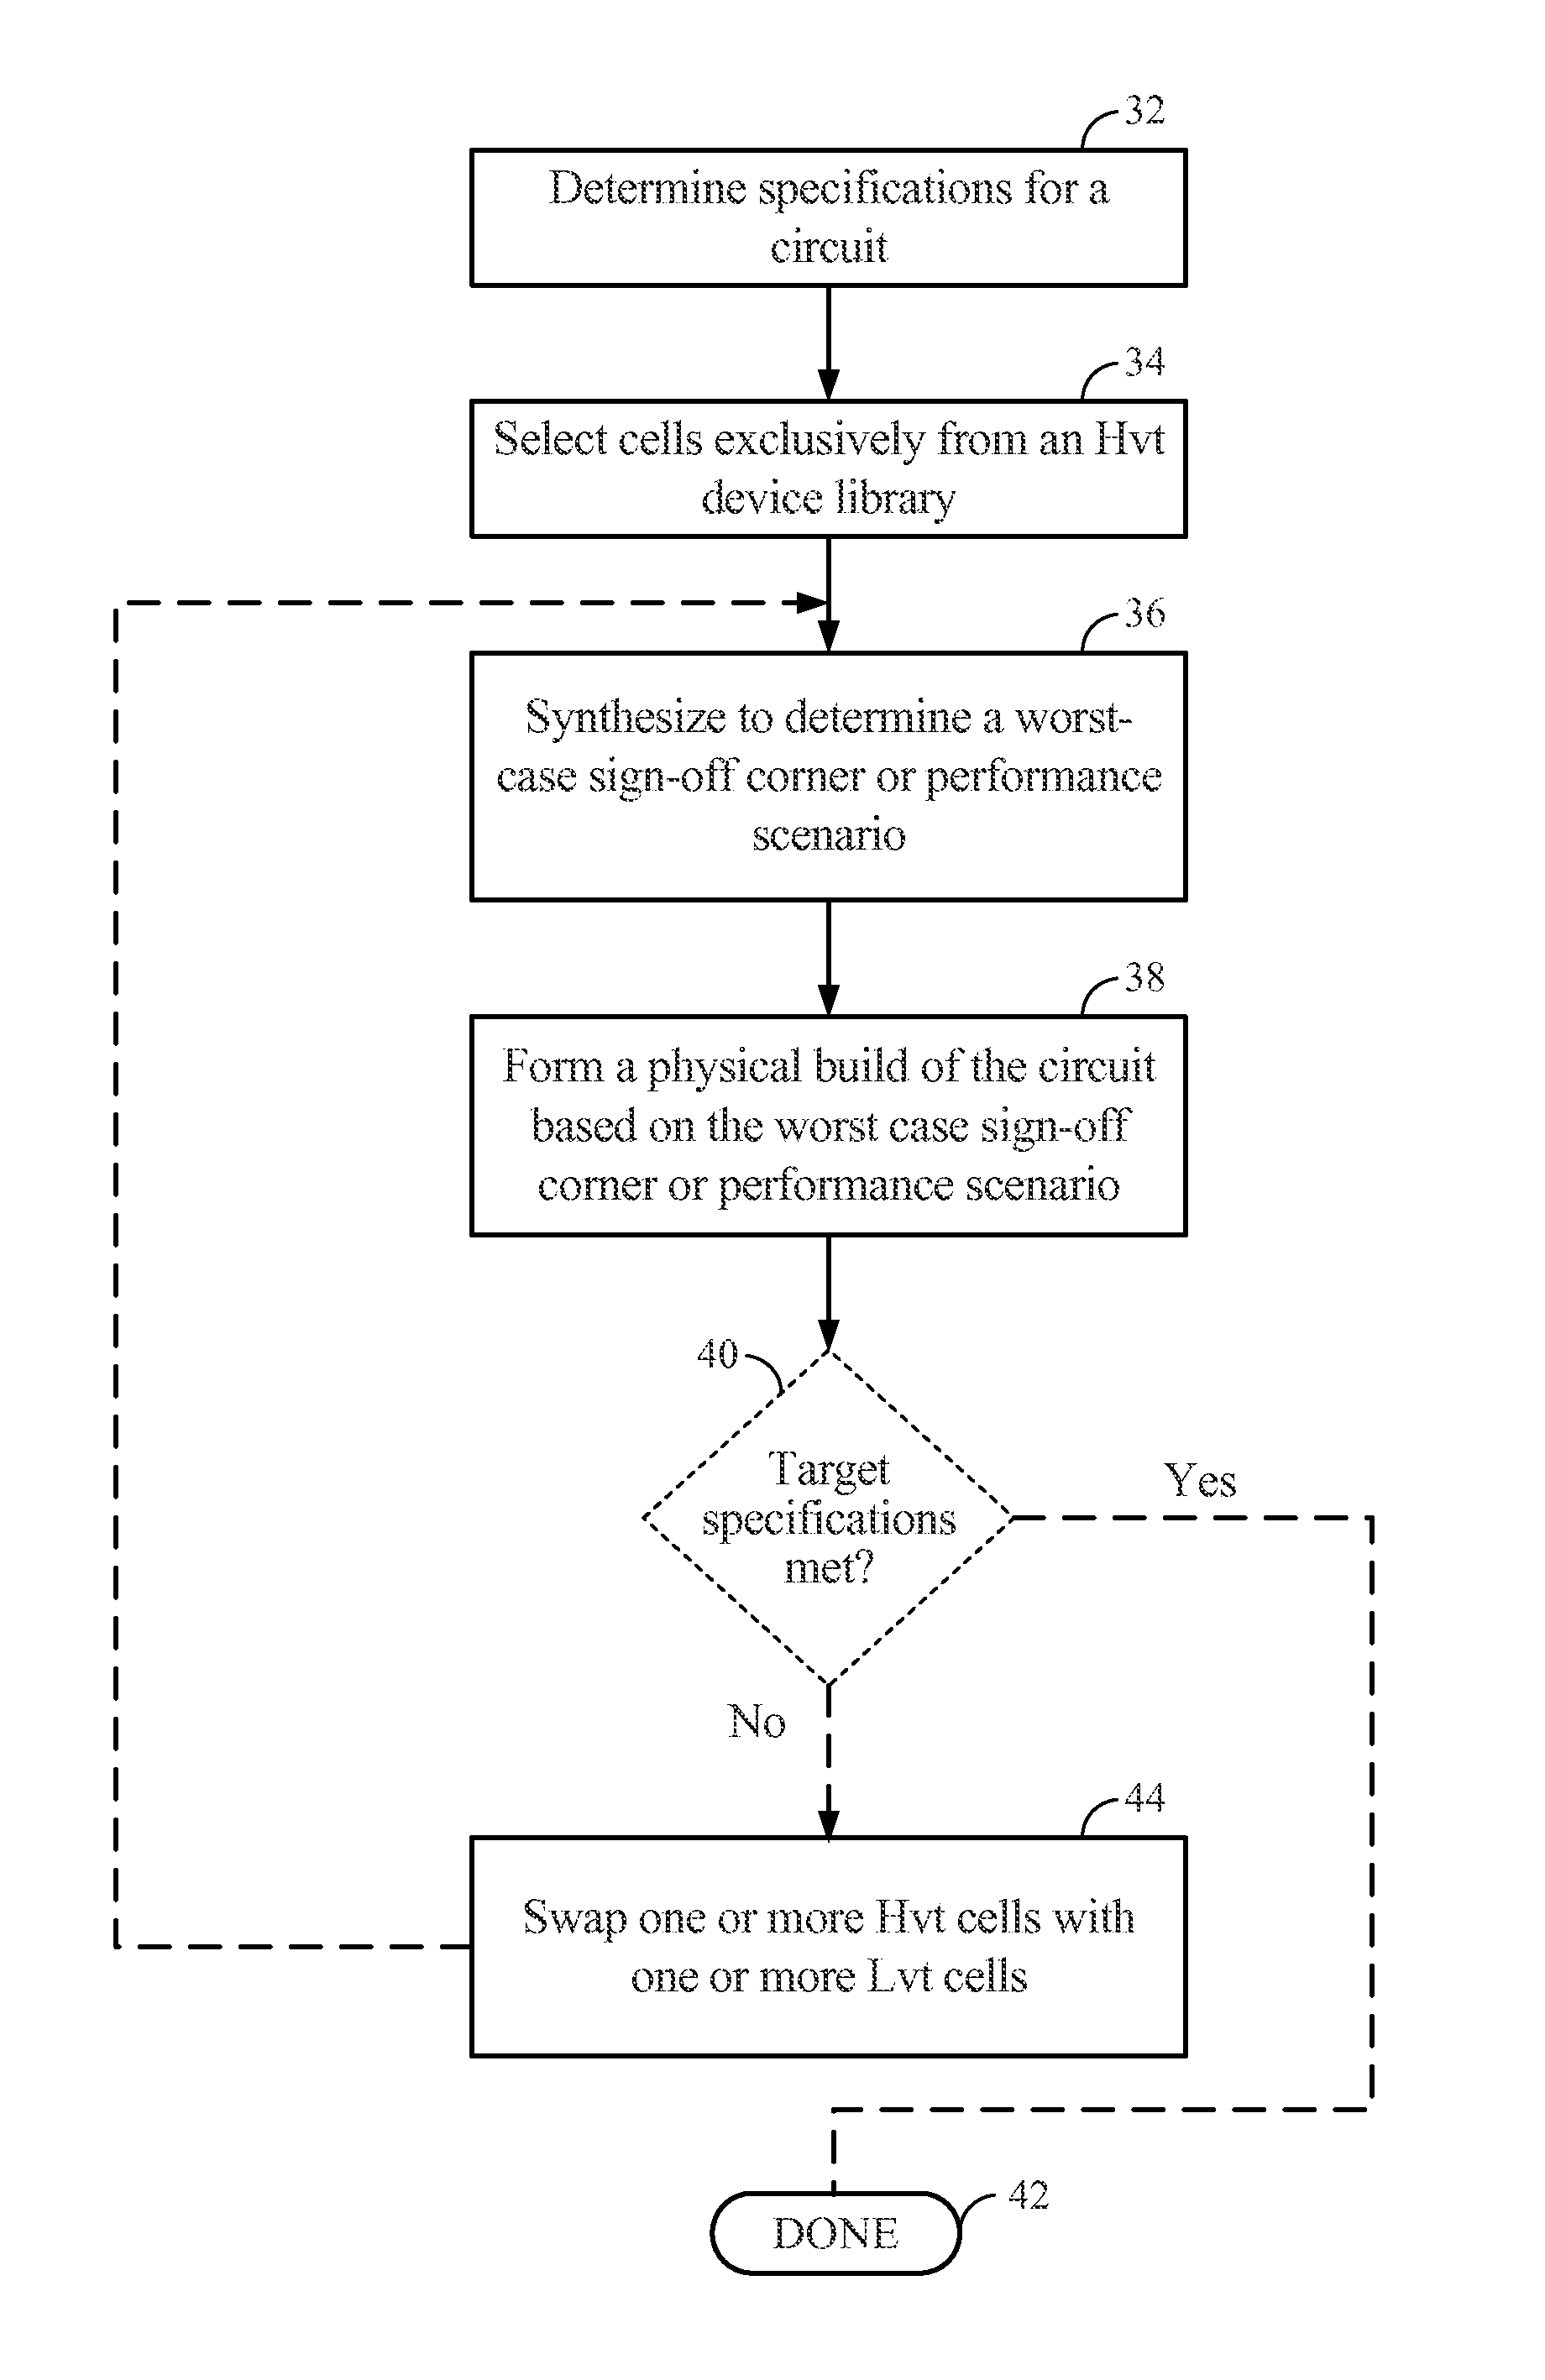 Methods and circuits for optimizing performance and power consumption in a design and circuit employing lower threshold voltage (LVT) devices